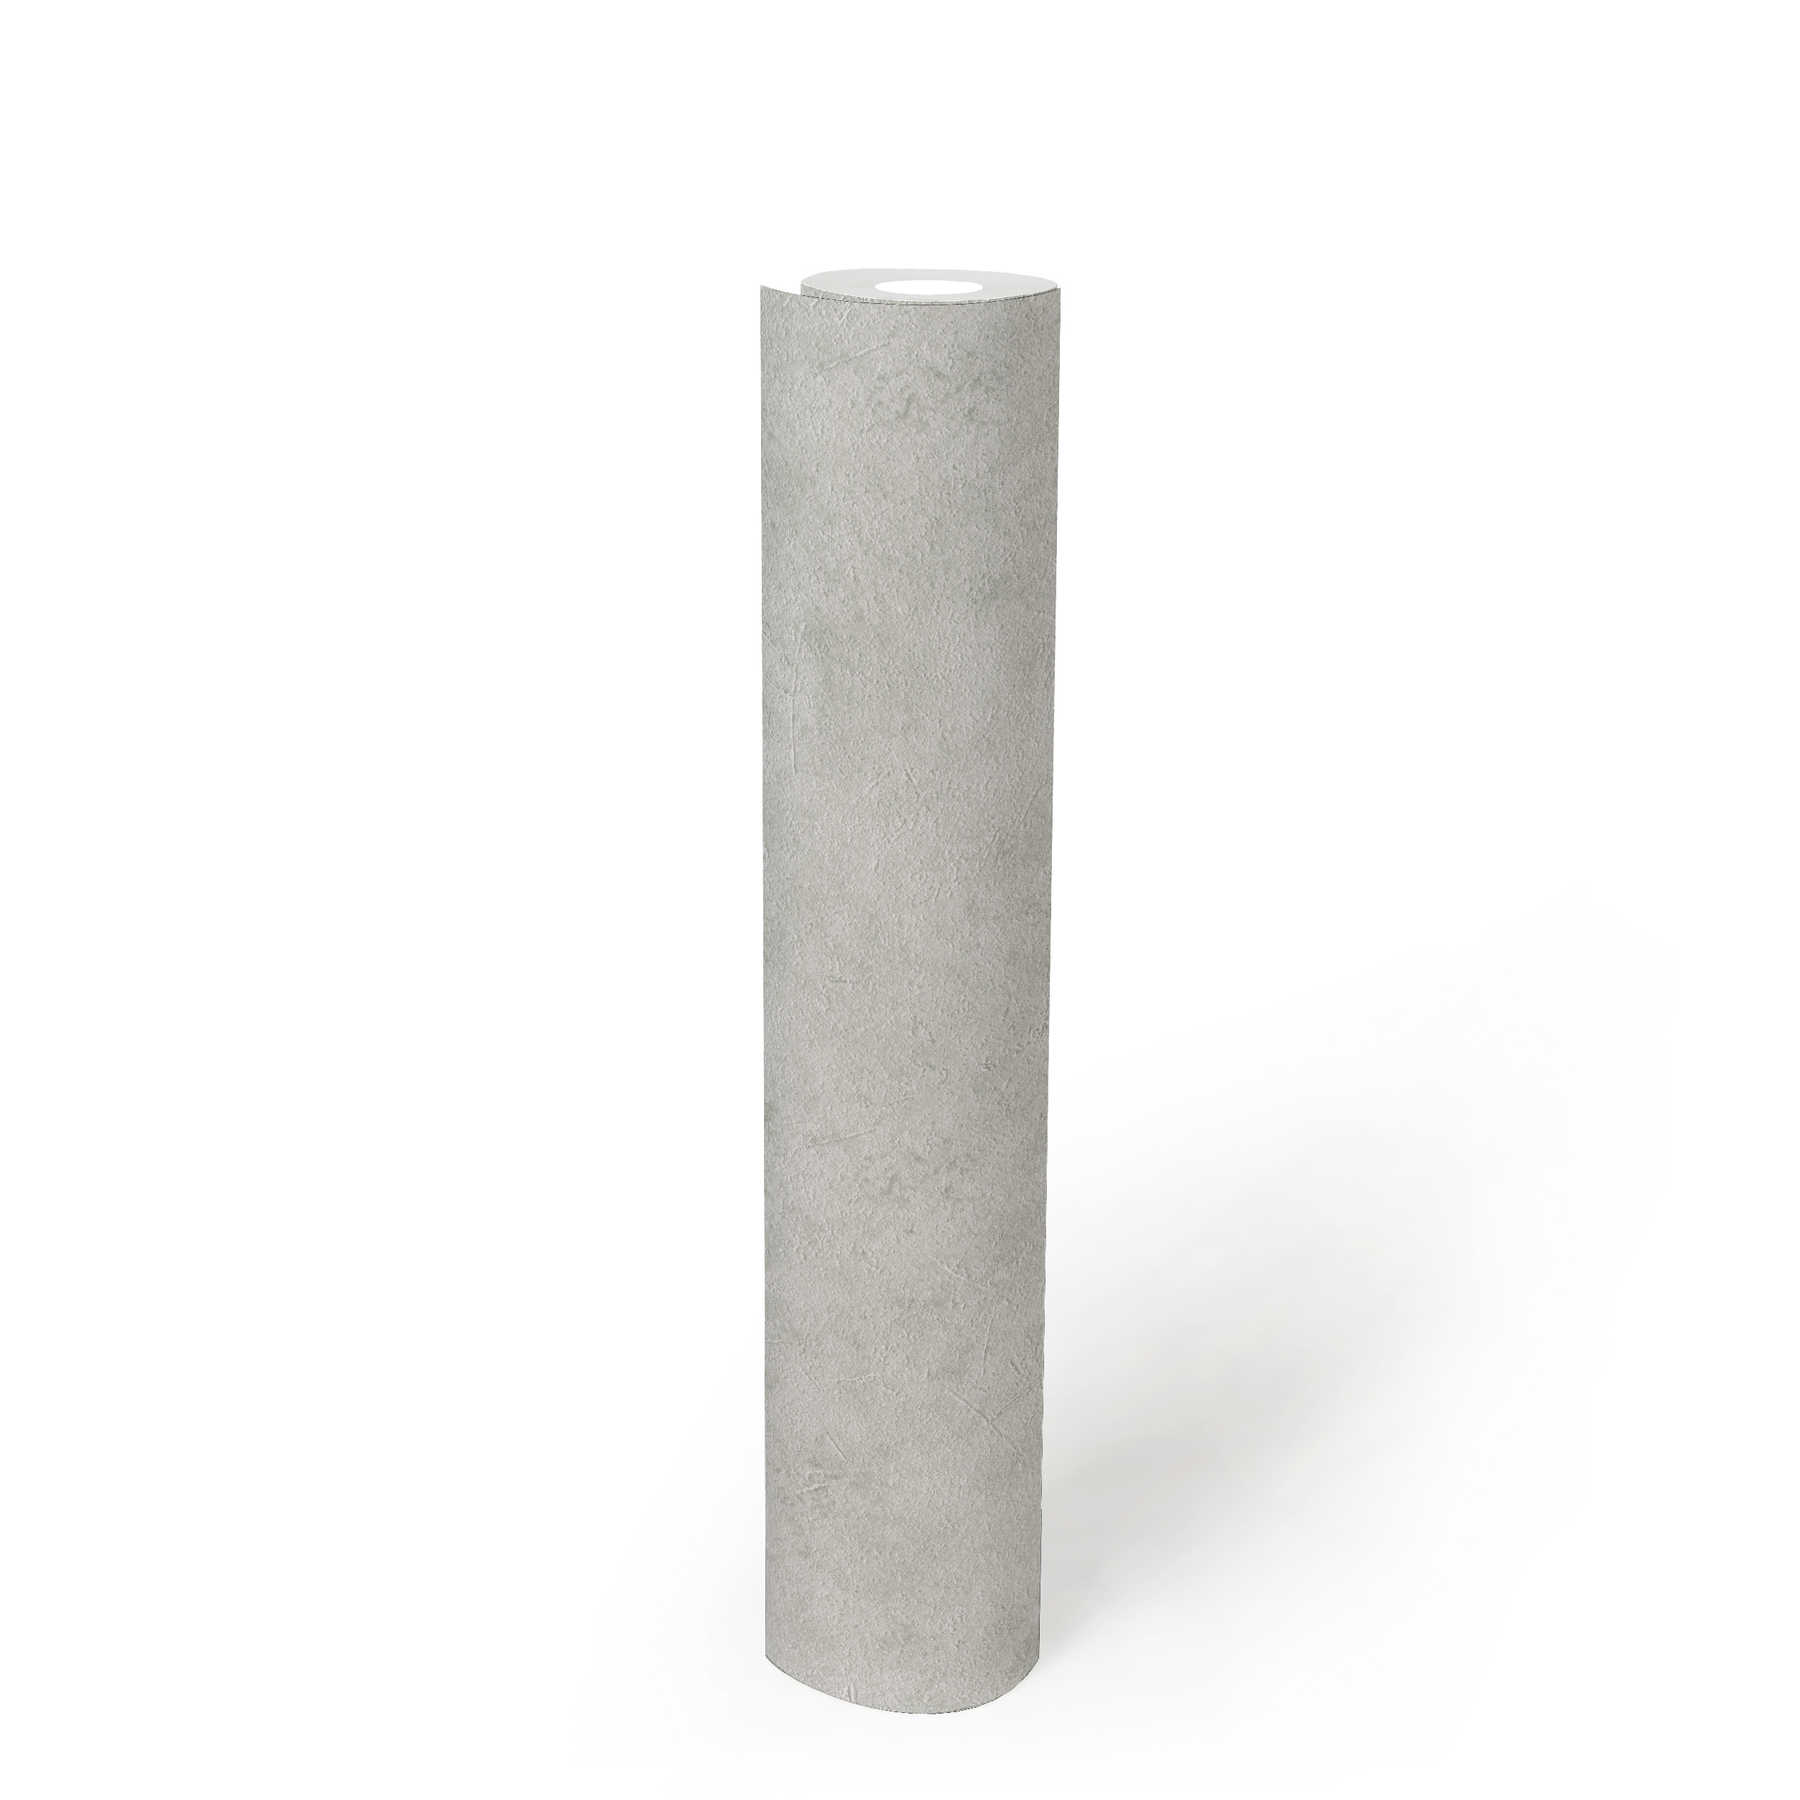             Wallpaper stone look with plaster structure in used look - grey, green
        